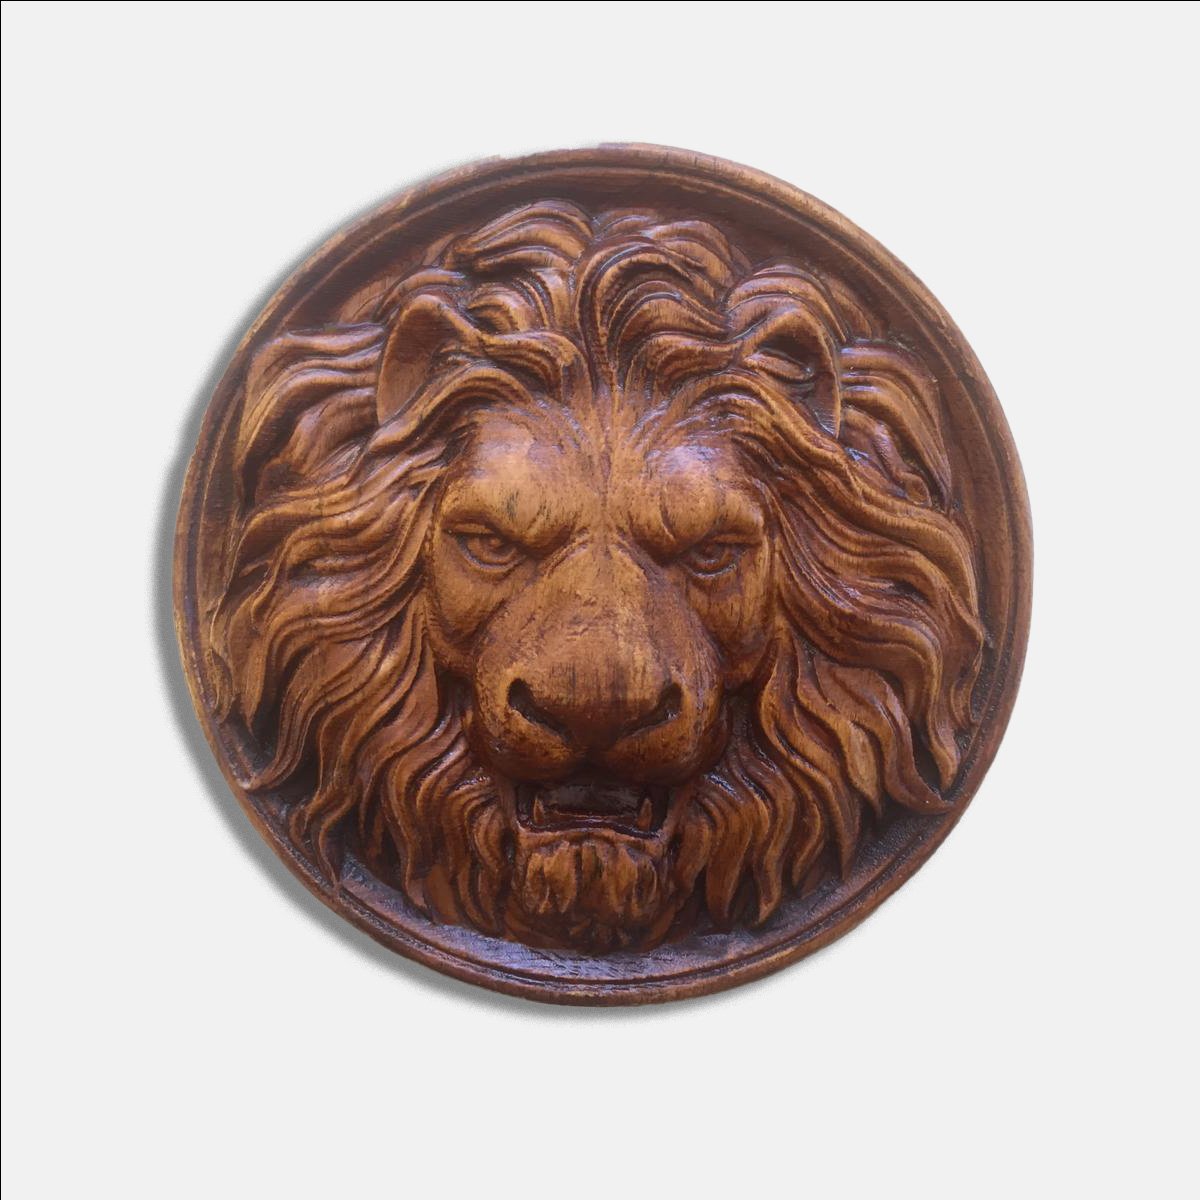 Lion head wood carved sculpture wooden wall hanging art decor plaque hunting gift animal collectible